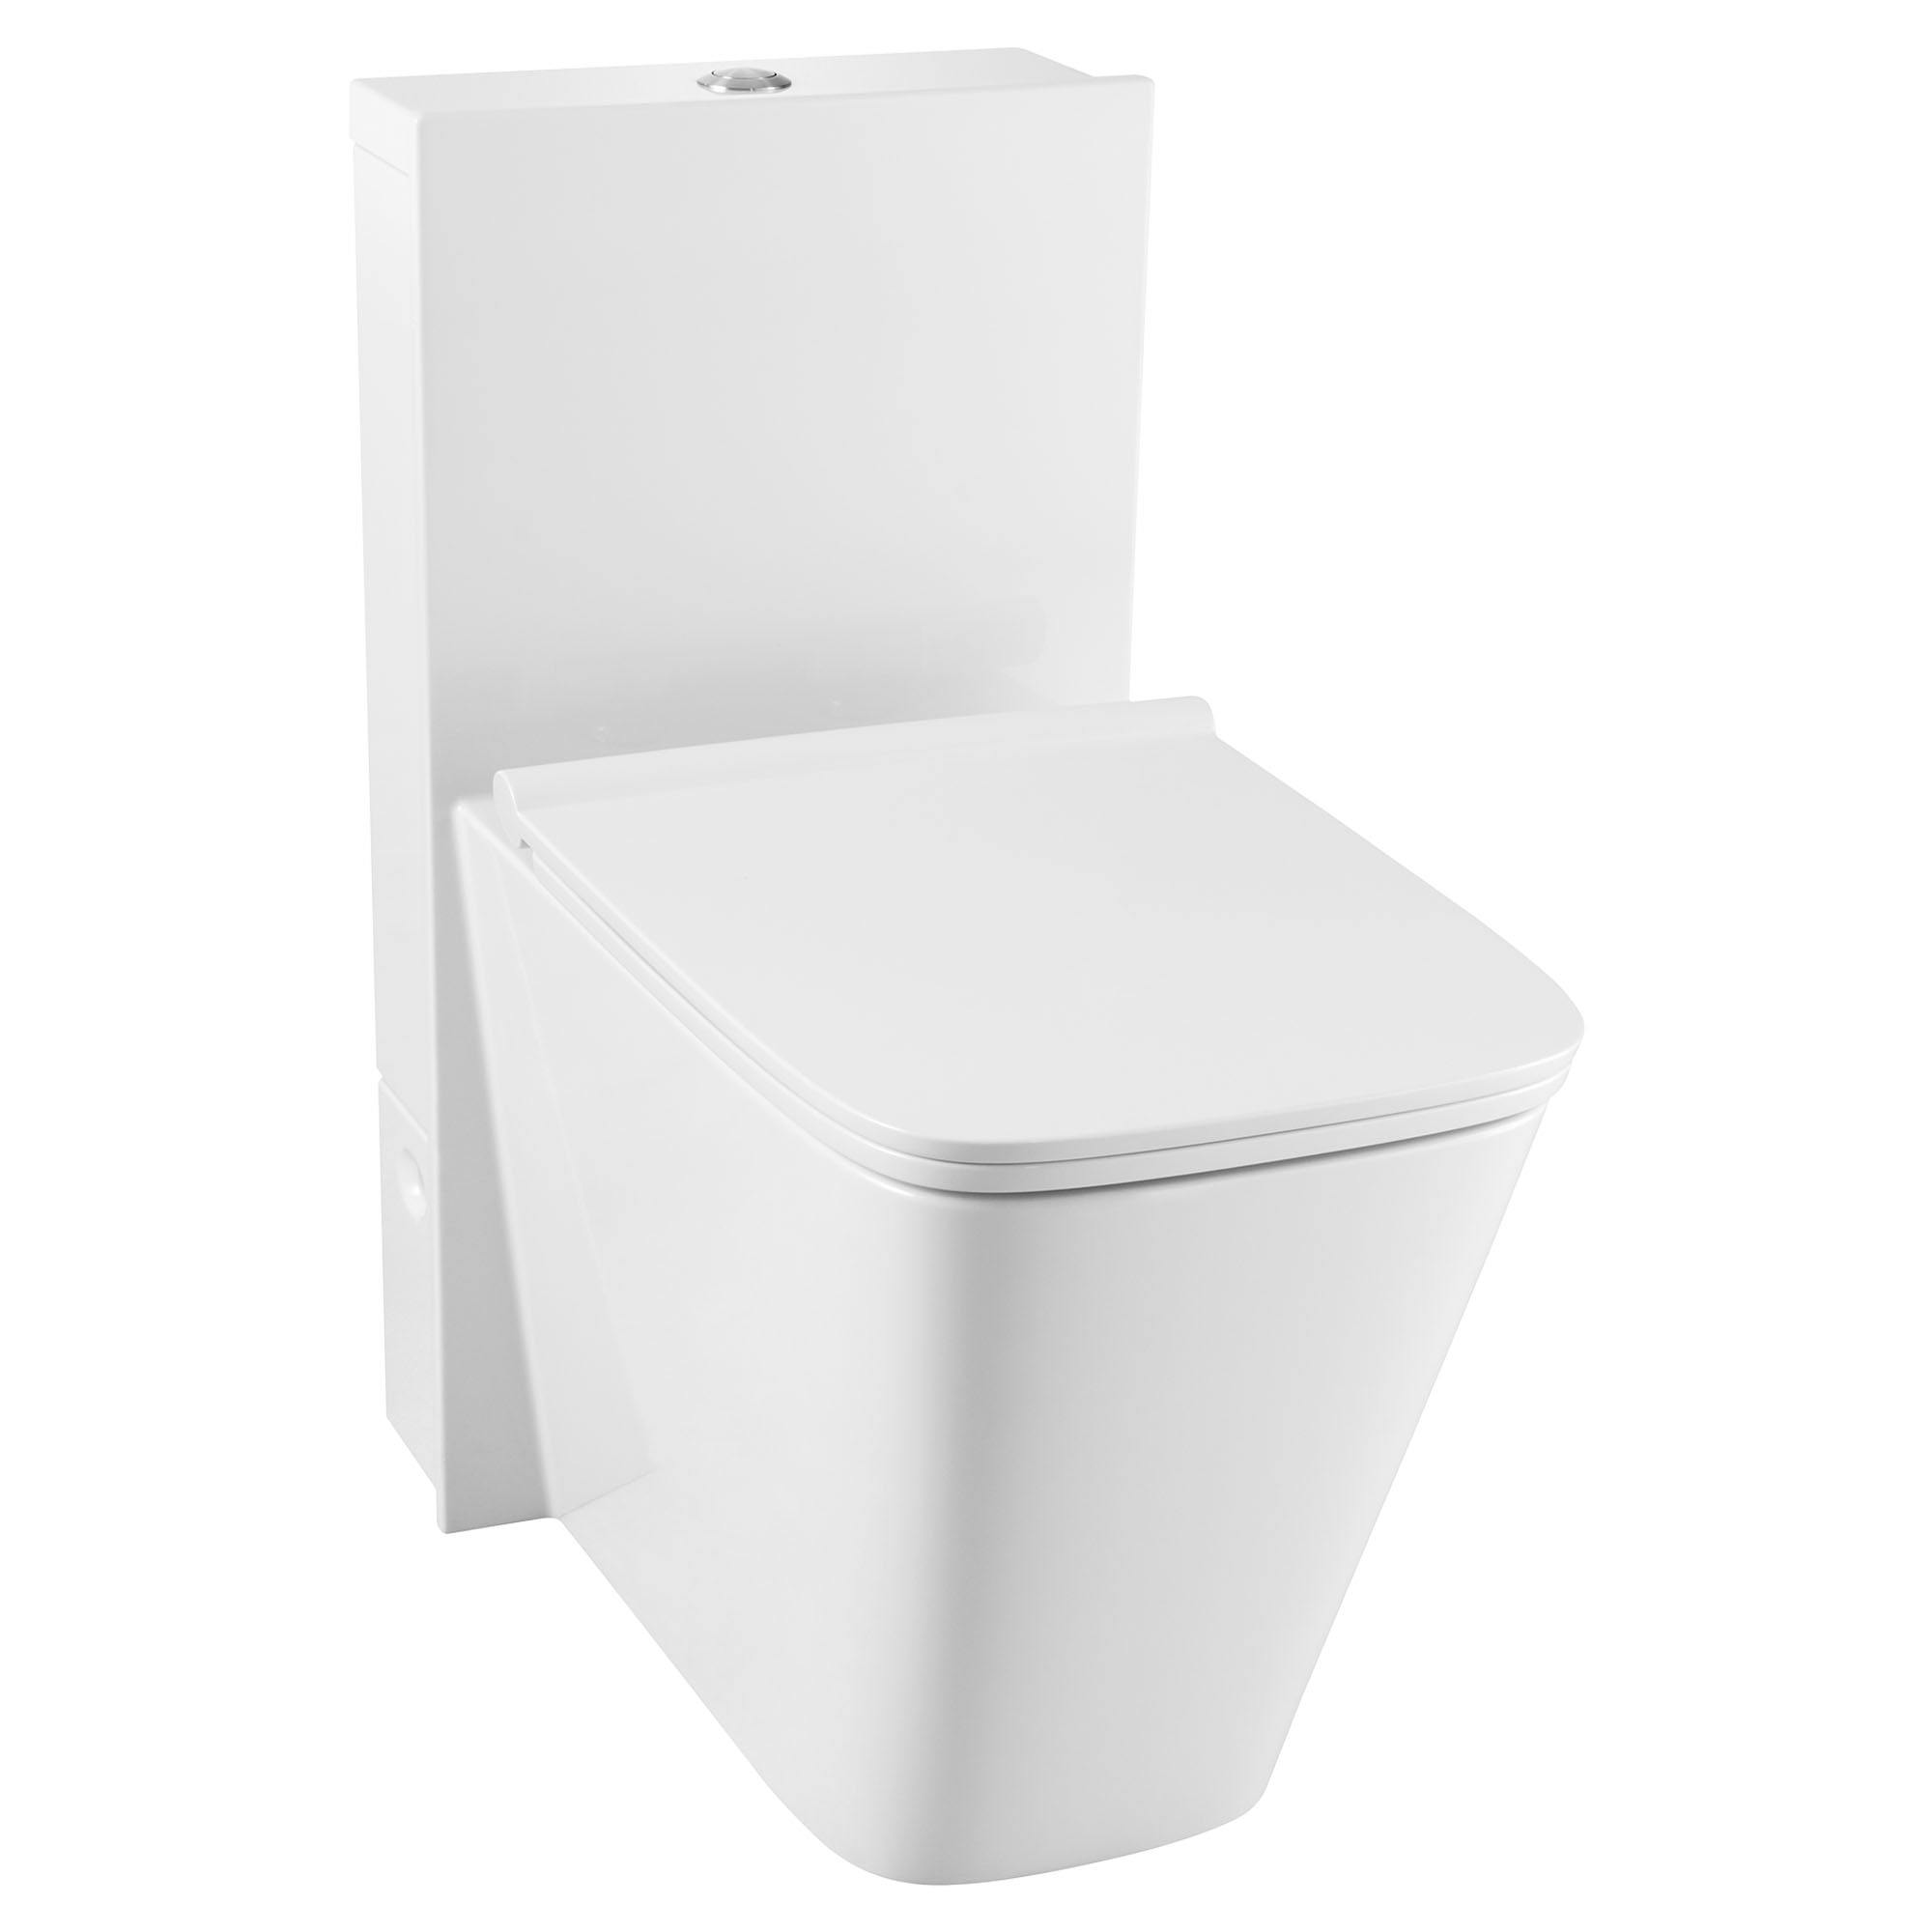 DXV Modulus One-Piece Chair Height Elongated Toilet with Seat